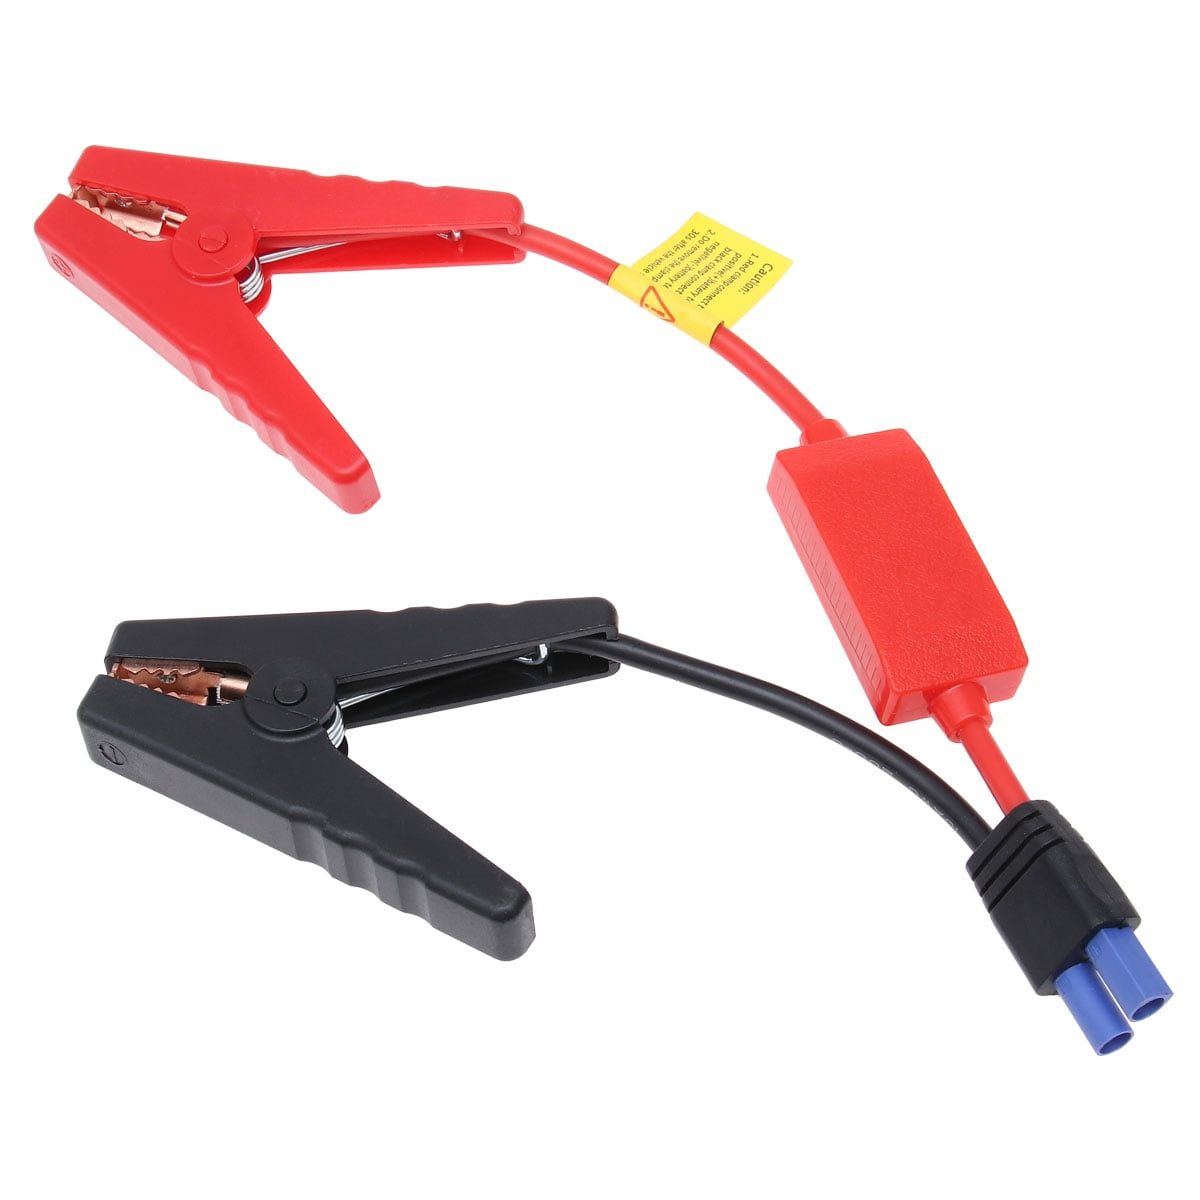 800A 20FT Car Battery Jumper Jump Start Booster Cables Emergency INSULATED CLIPS 